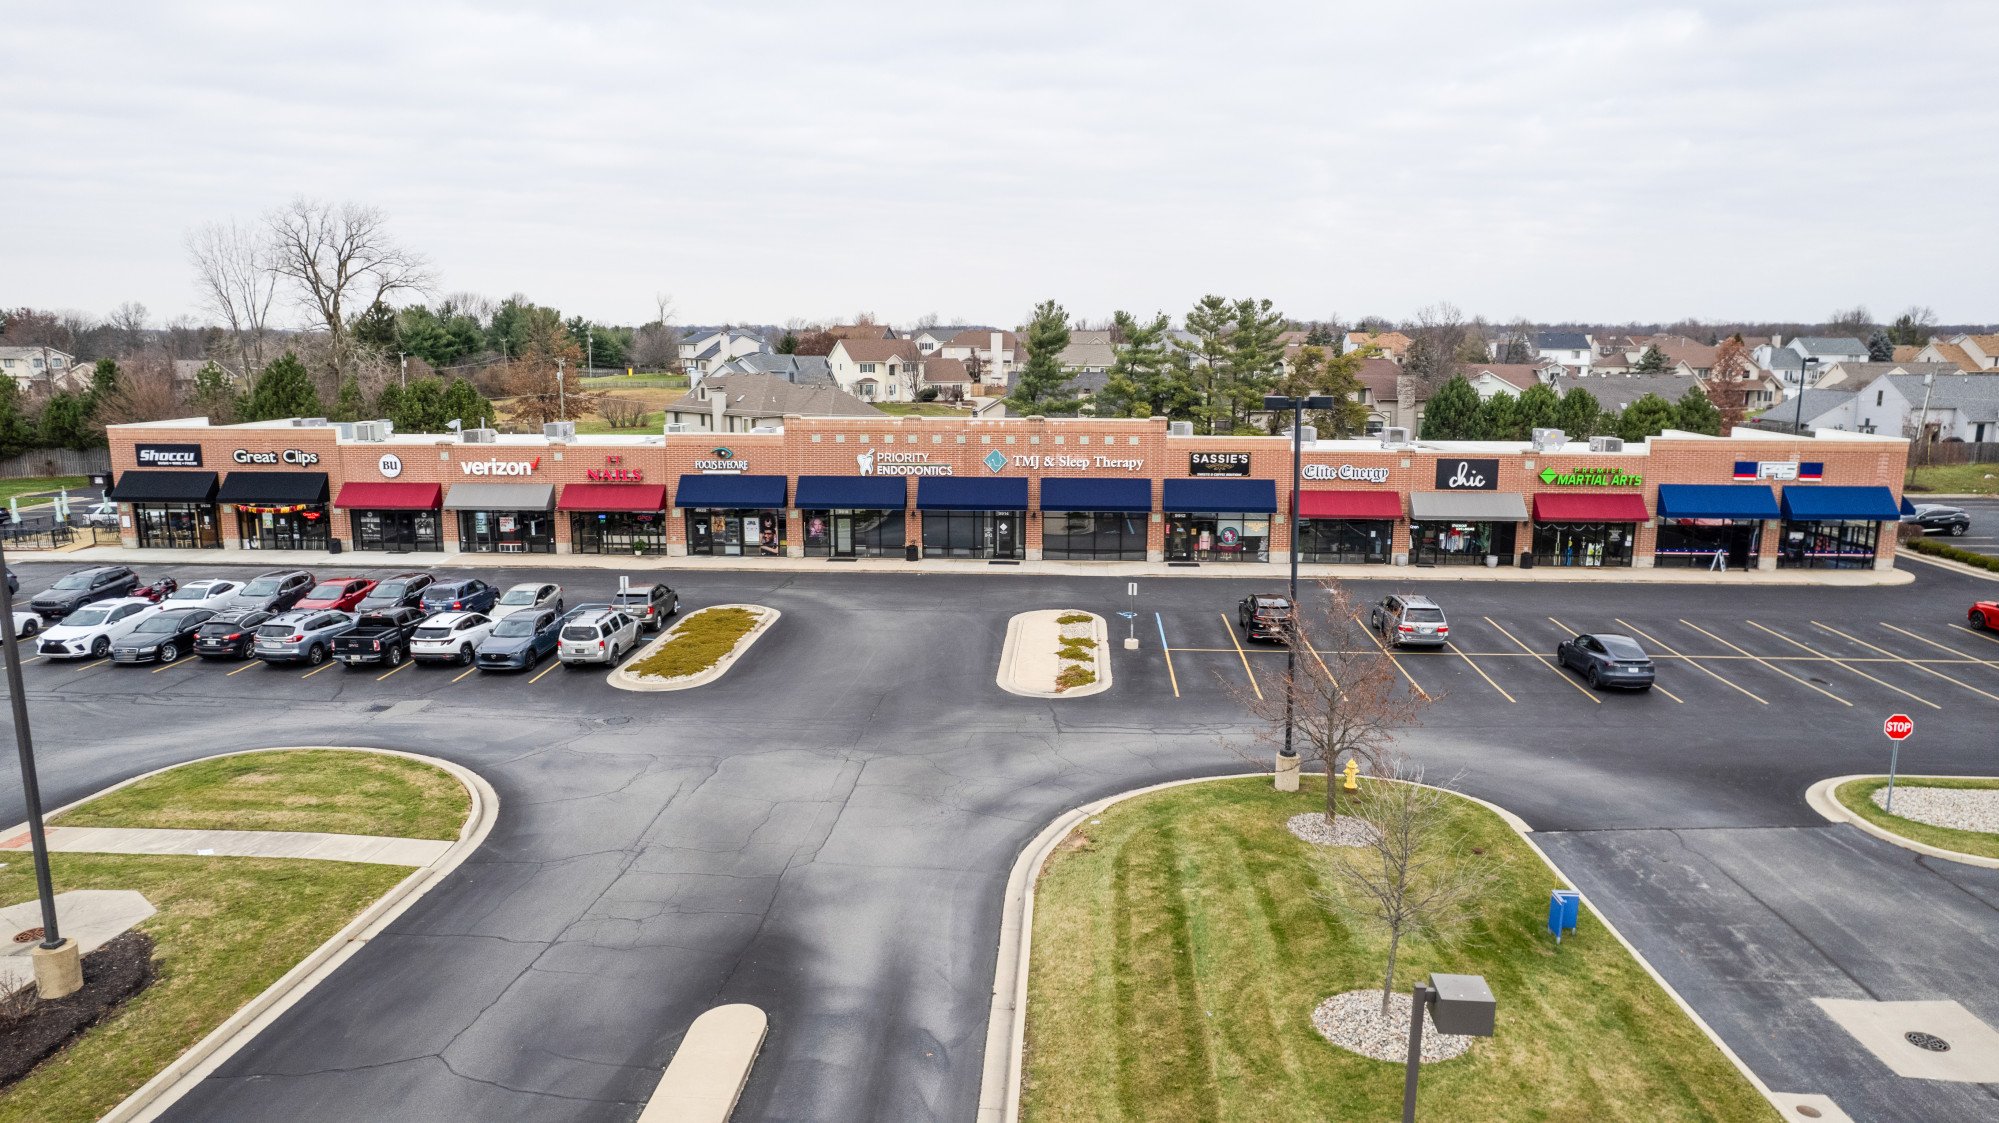 Sturges Property Group - Shorewood Shops Retail Space For Lease Fort Wayne Indiana